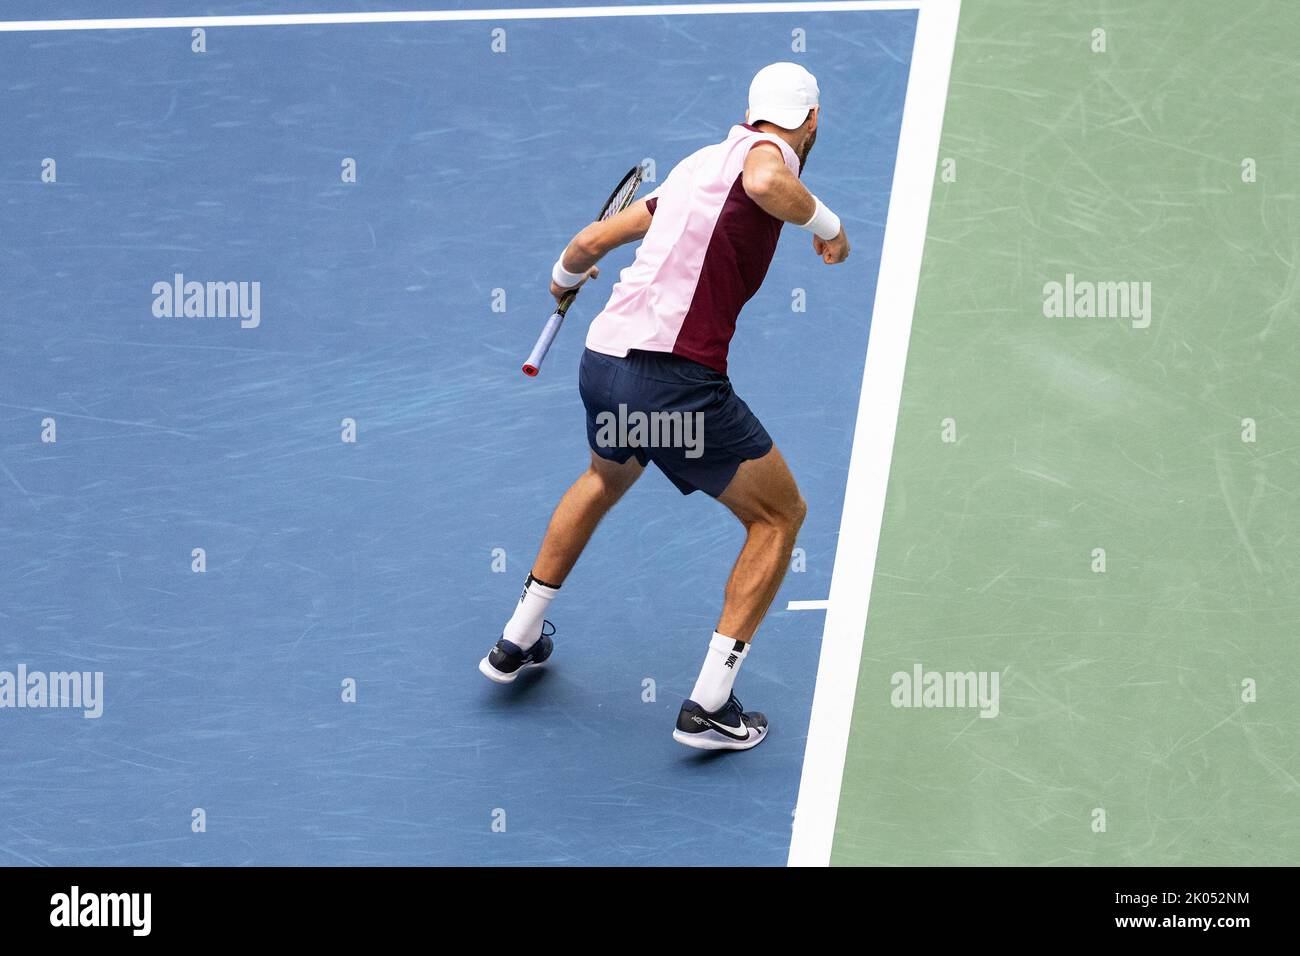 New York, USA. 09th Sep, 2022. Karen Khachanov reacts during semifinal of US Open Championships against Casper Ruud of Norway at USTA Billie Jean King National Tennis Center in New York on September 9, 2022. Ruud won in four sets and will play his first ever US Open final. (Photo by Lev Radin/Sipa USA) Credit: Sipa USA/Alamy Live News Stock Photo